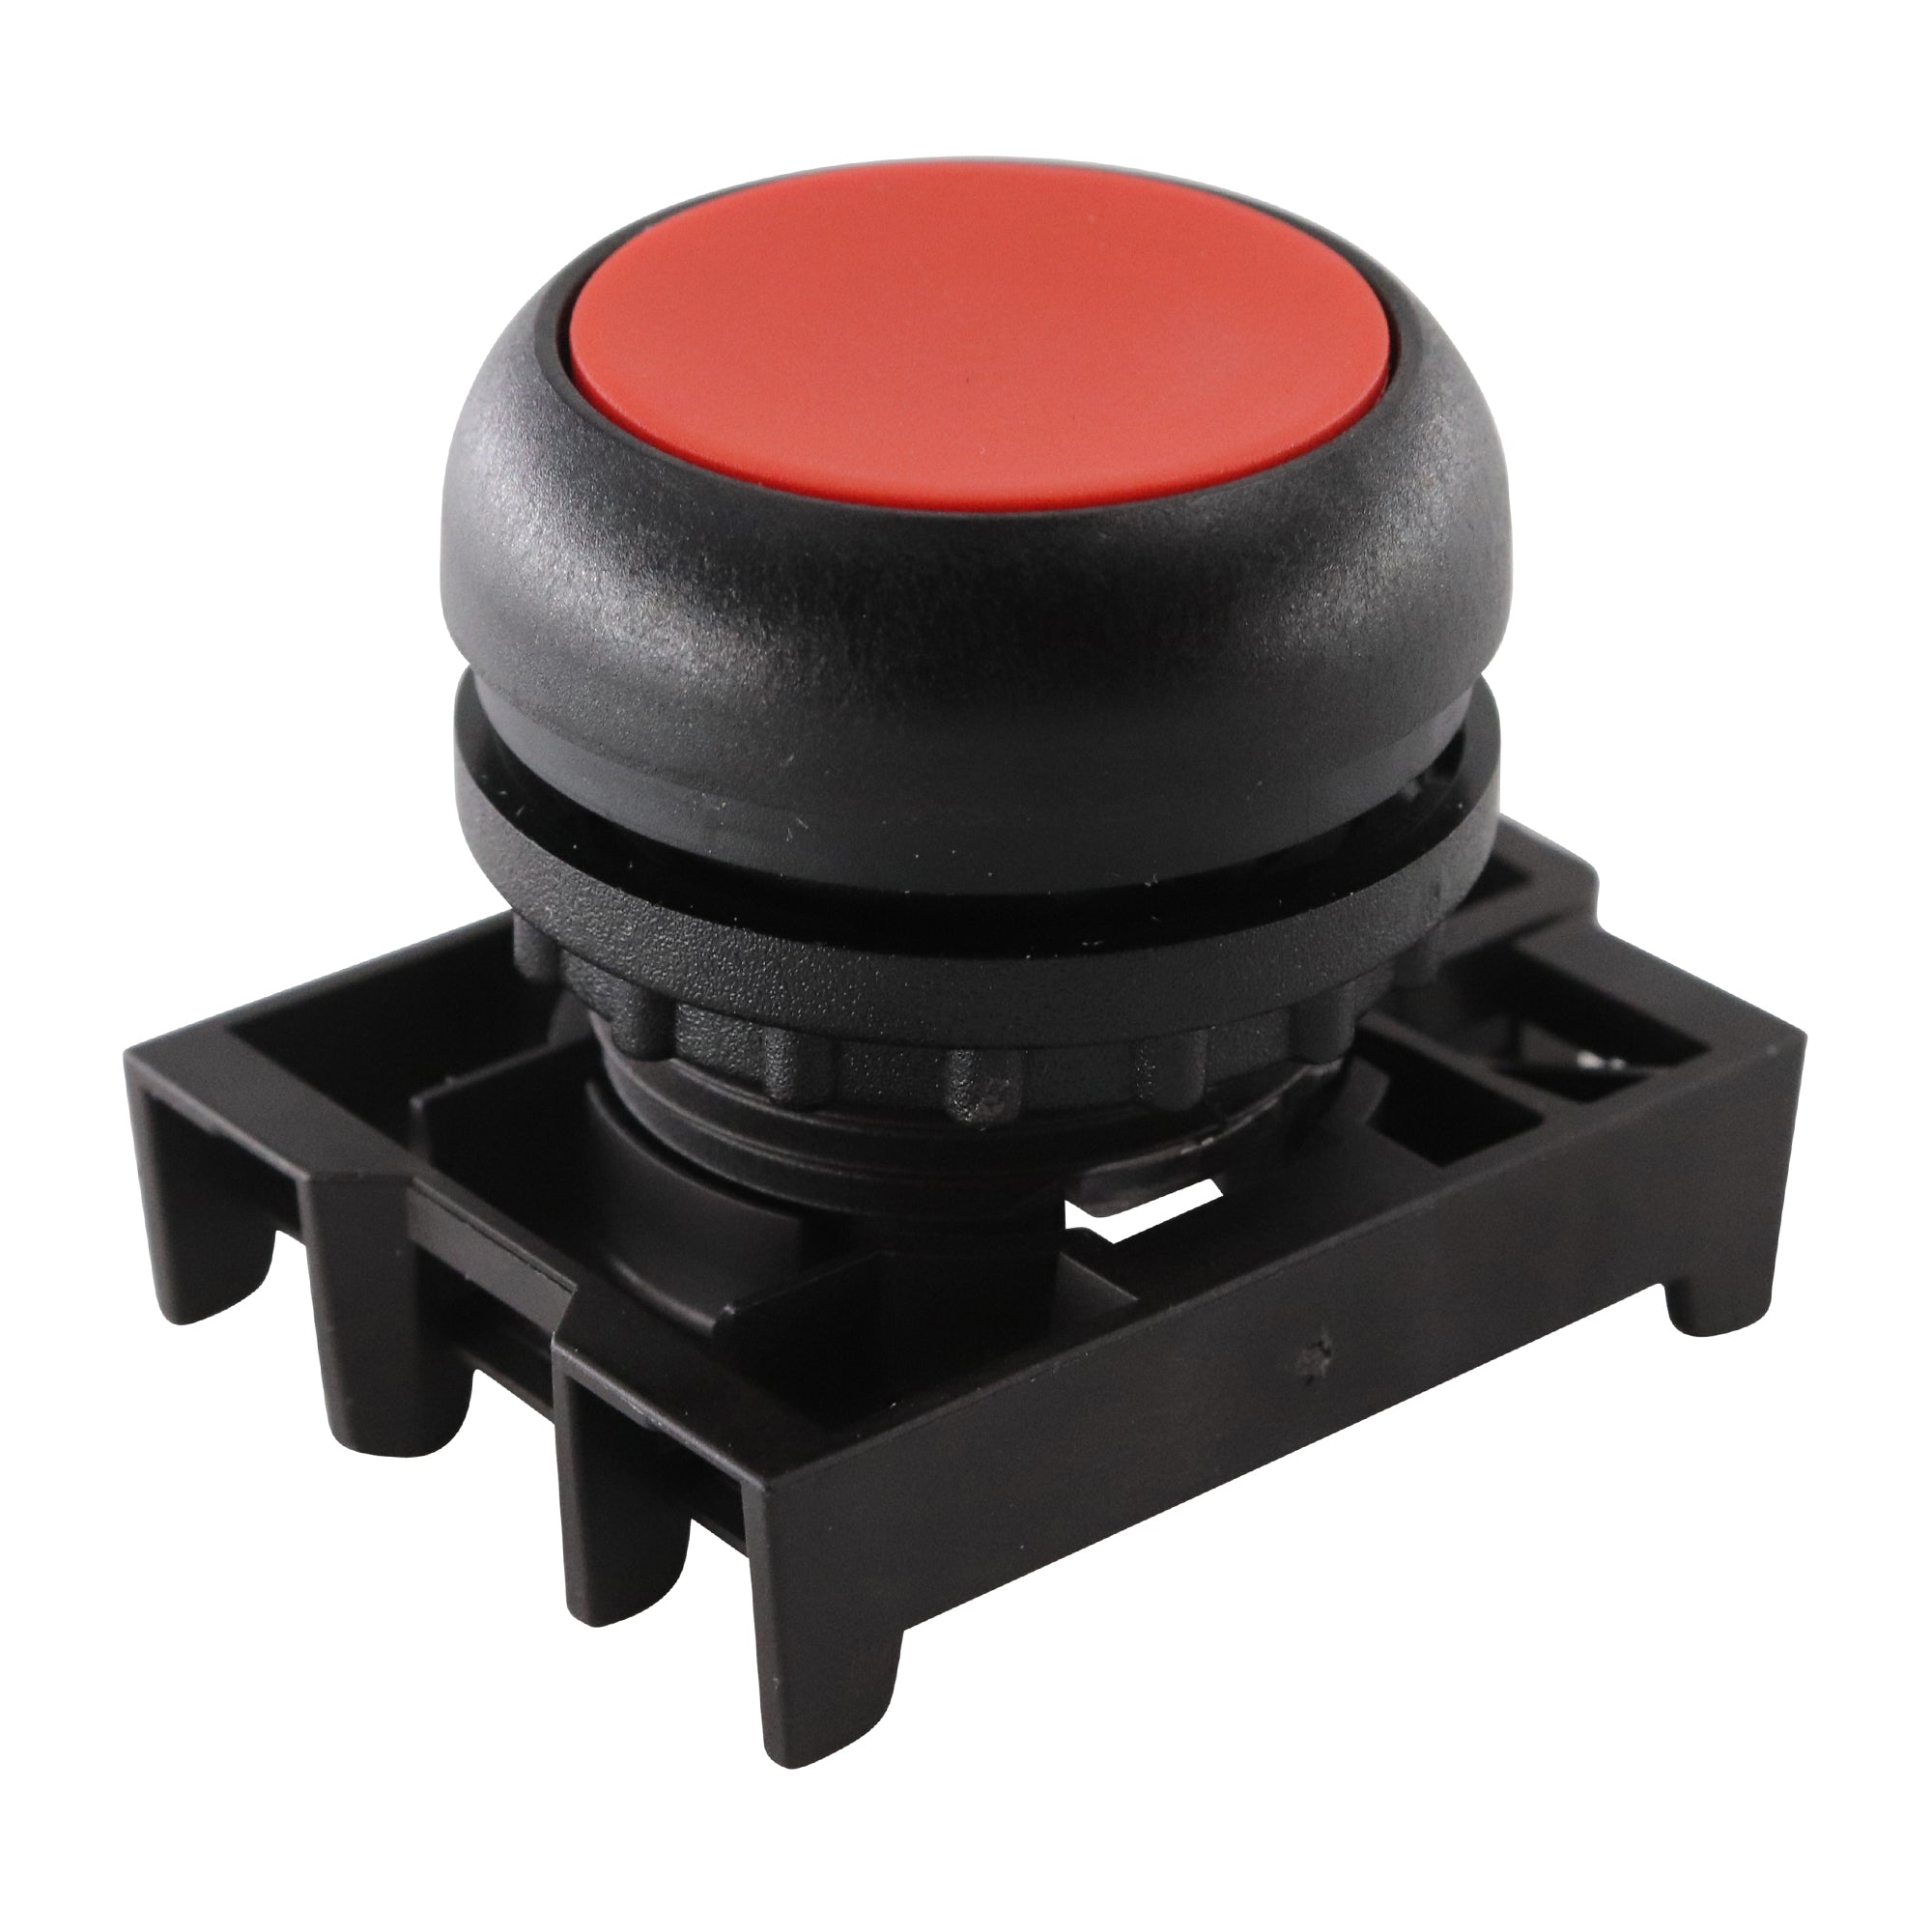 EATON, EATON M22S-D-X-SRG PUSH-BUTTON ACTUATOR, ON/OFF, FLUSH, 22MM, RED/BLACK/GREEN